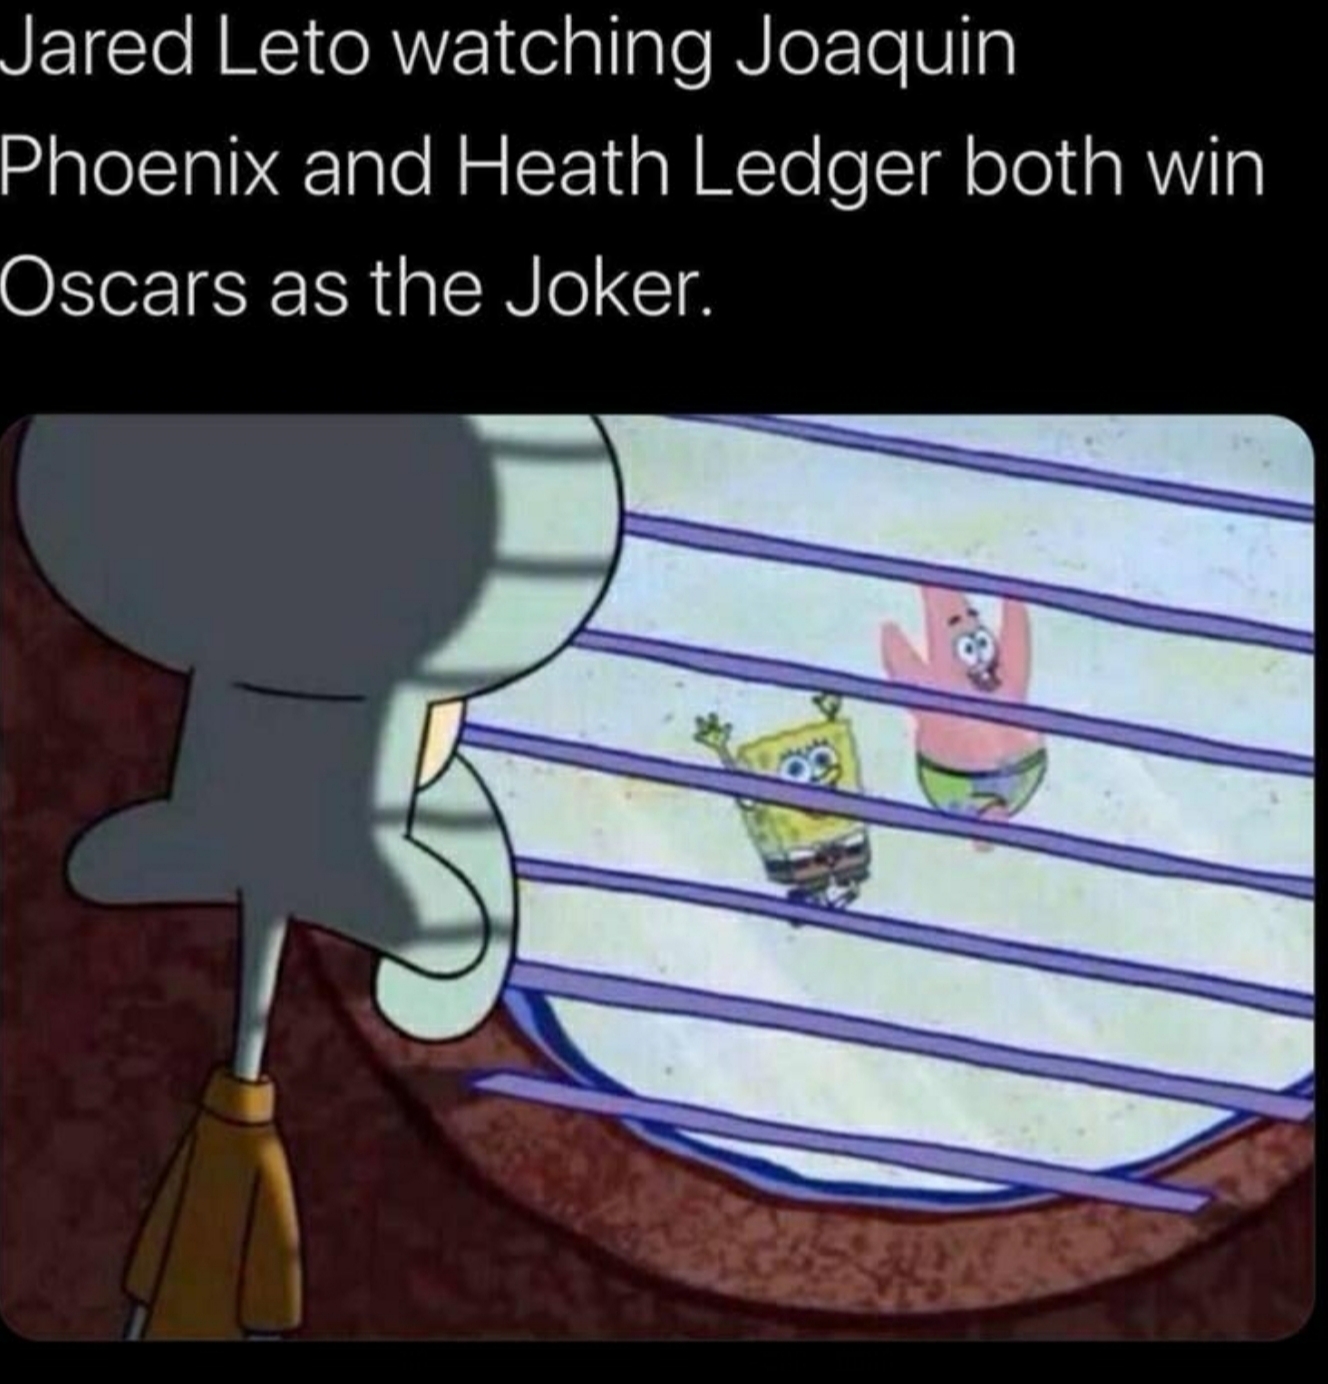 your friends are playing but you re stuck in a guitar - Jared Leto watching Joaquin Phoenix and Heath Ledger both win Oscars as the Joker.